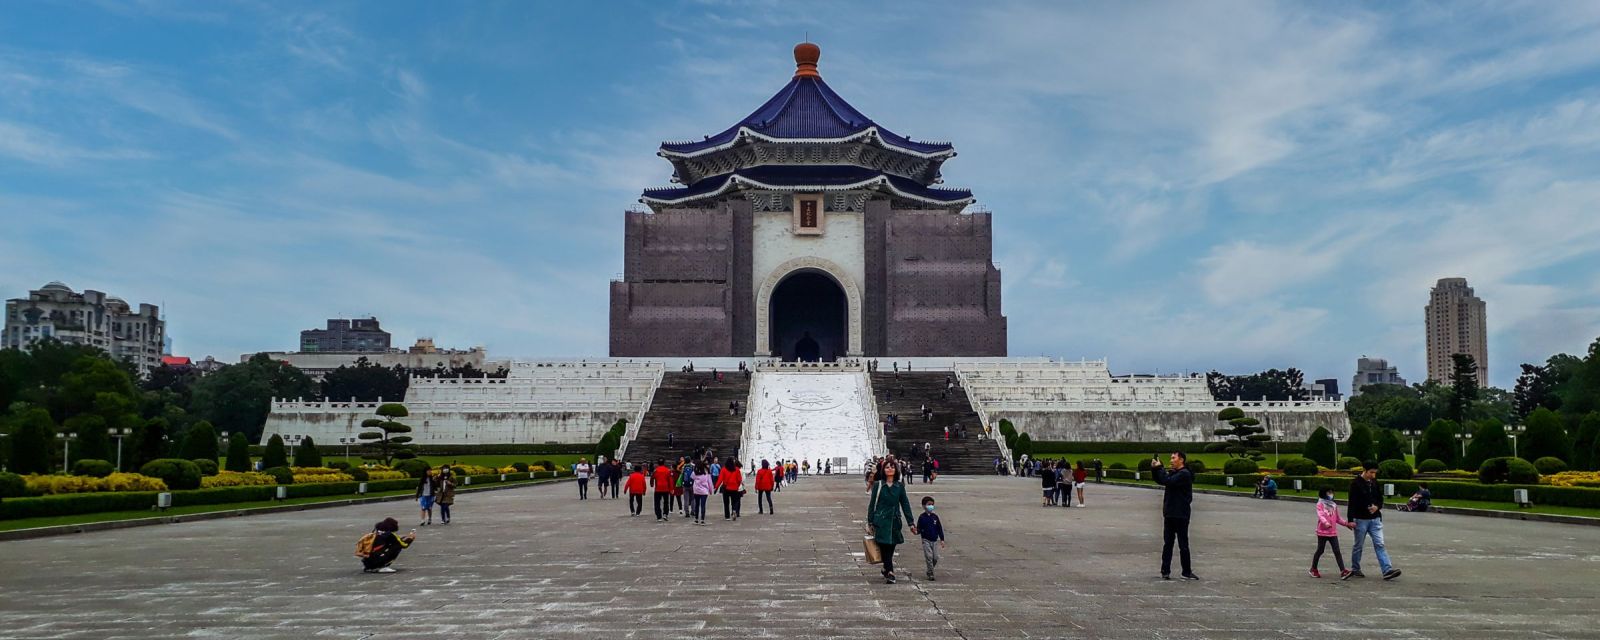 Chiang Kai-shek Memorial Hall and the Changing of the Guard in Taipei - Tips and 9 Facts